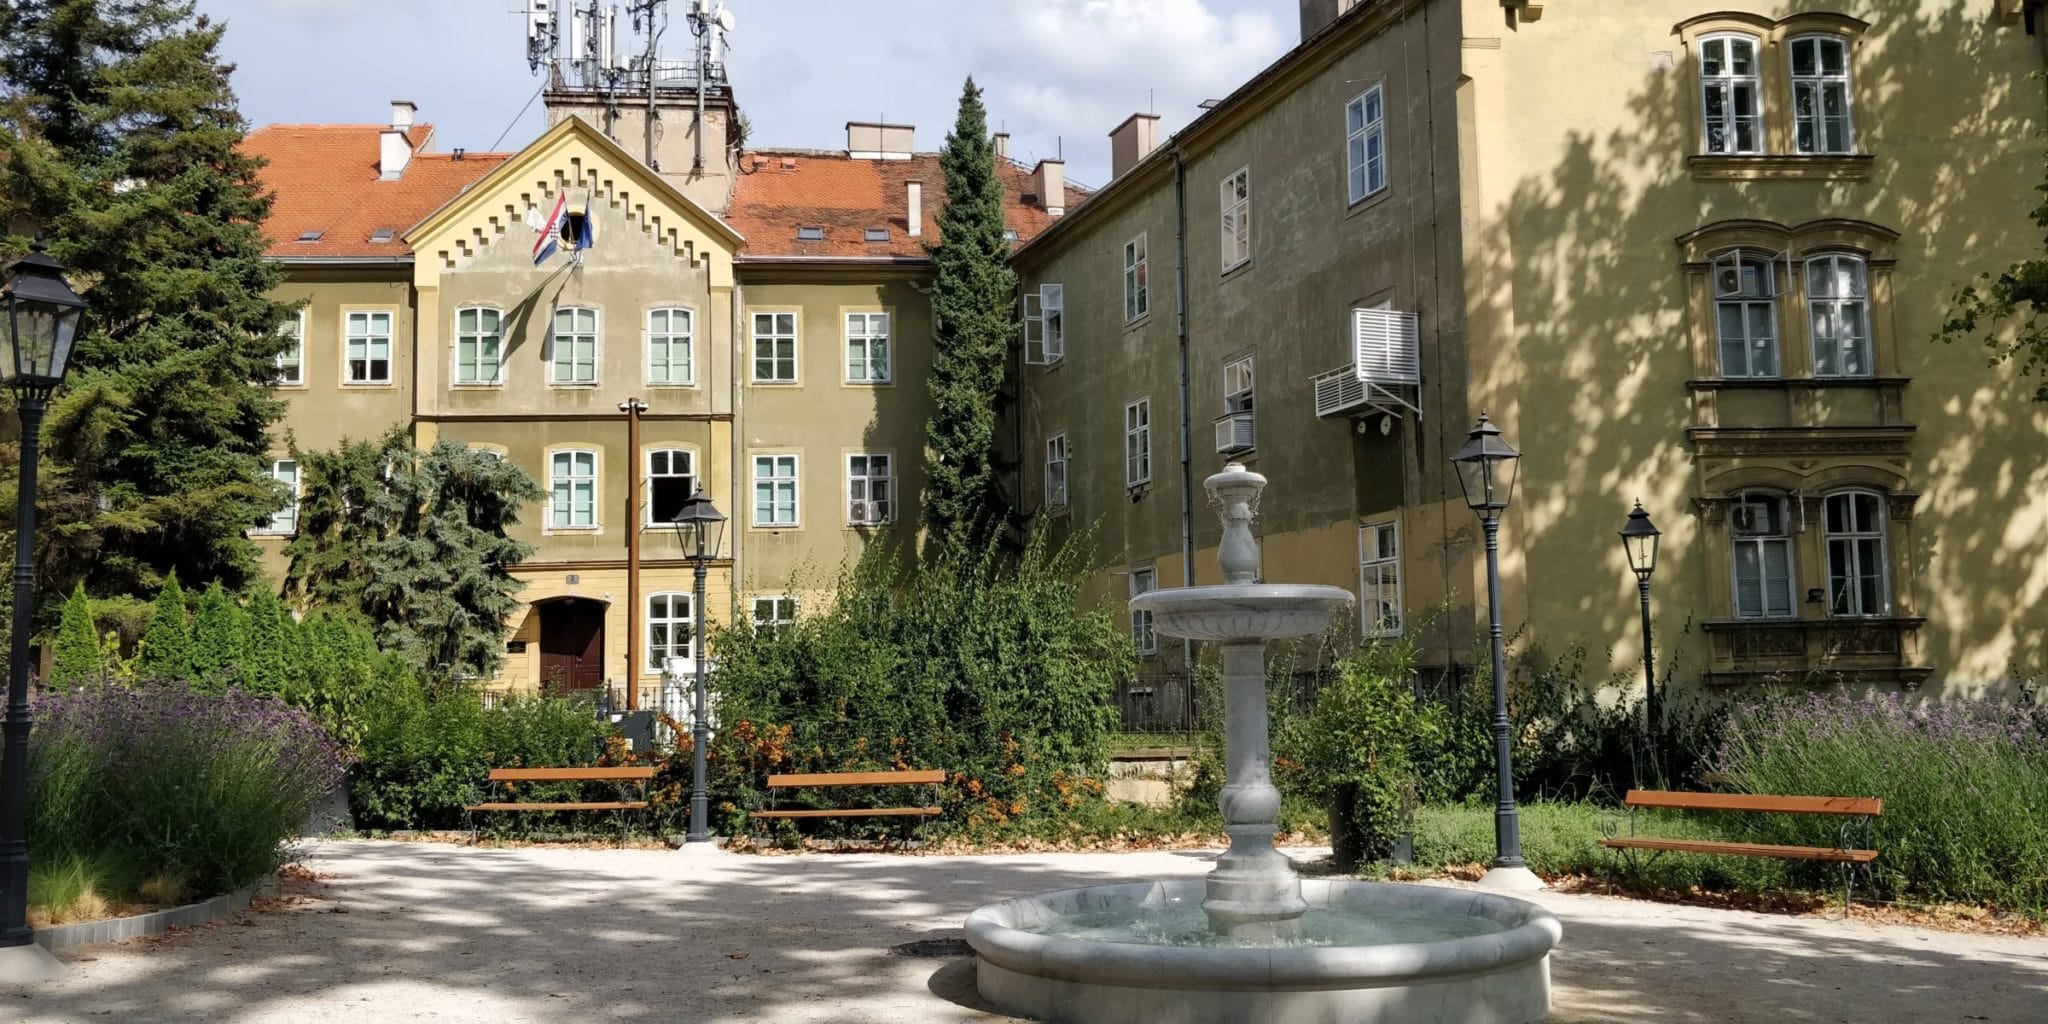 fountain and buildings in zagreb